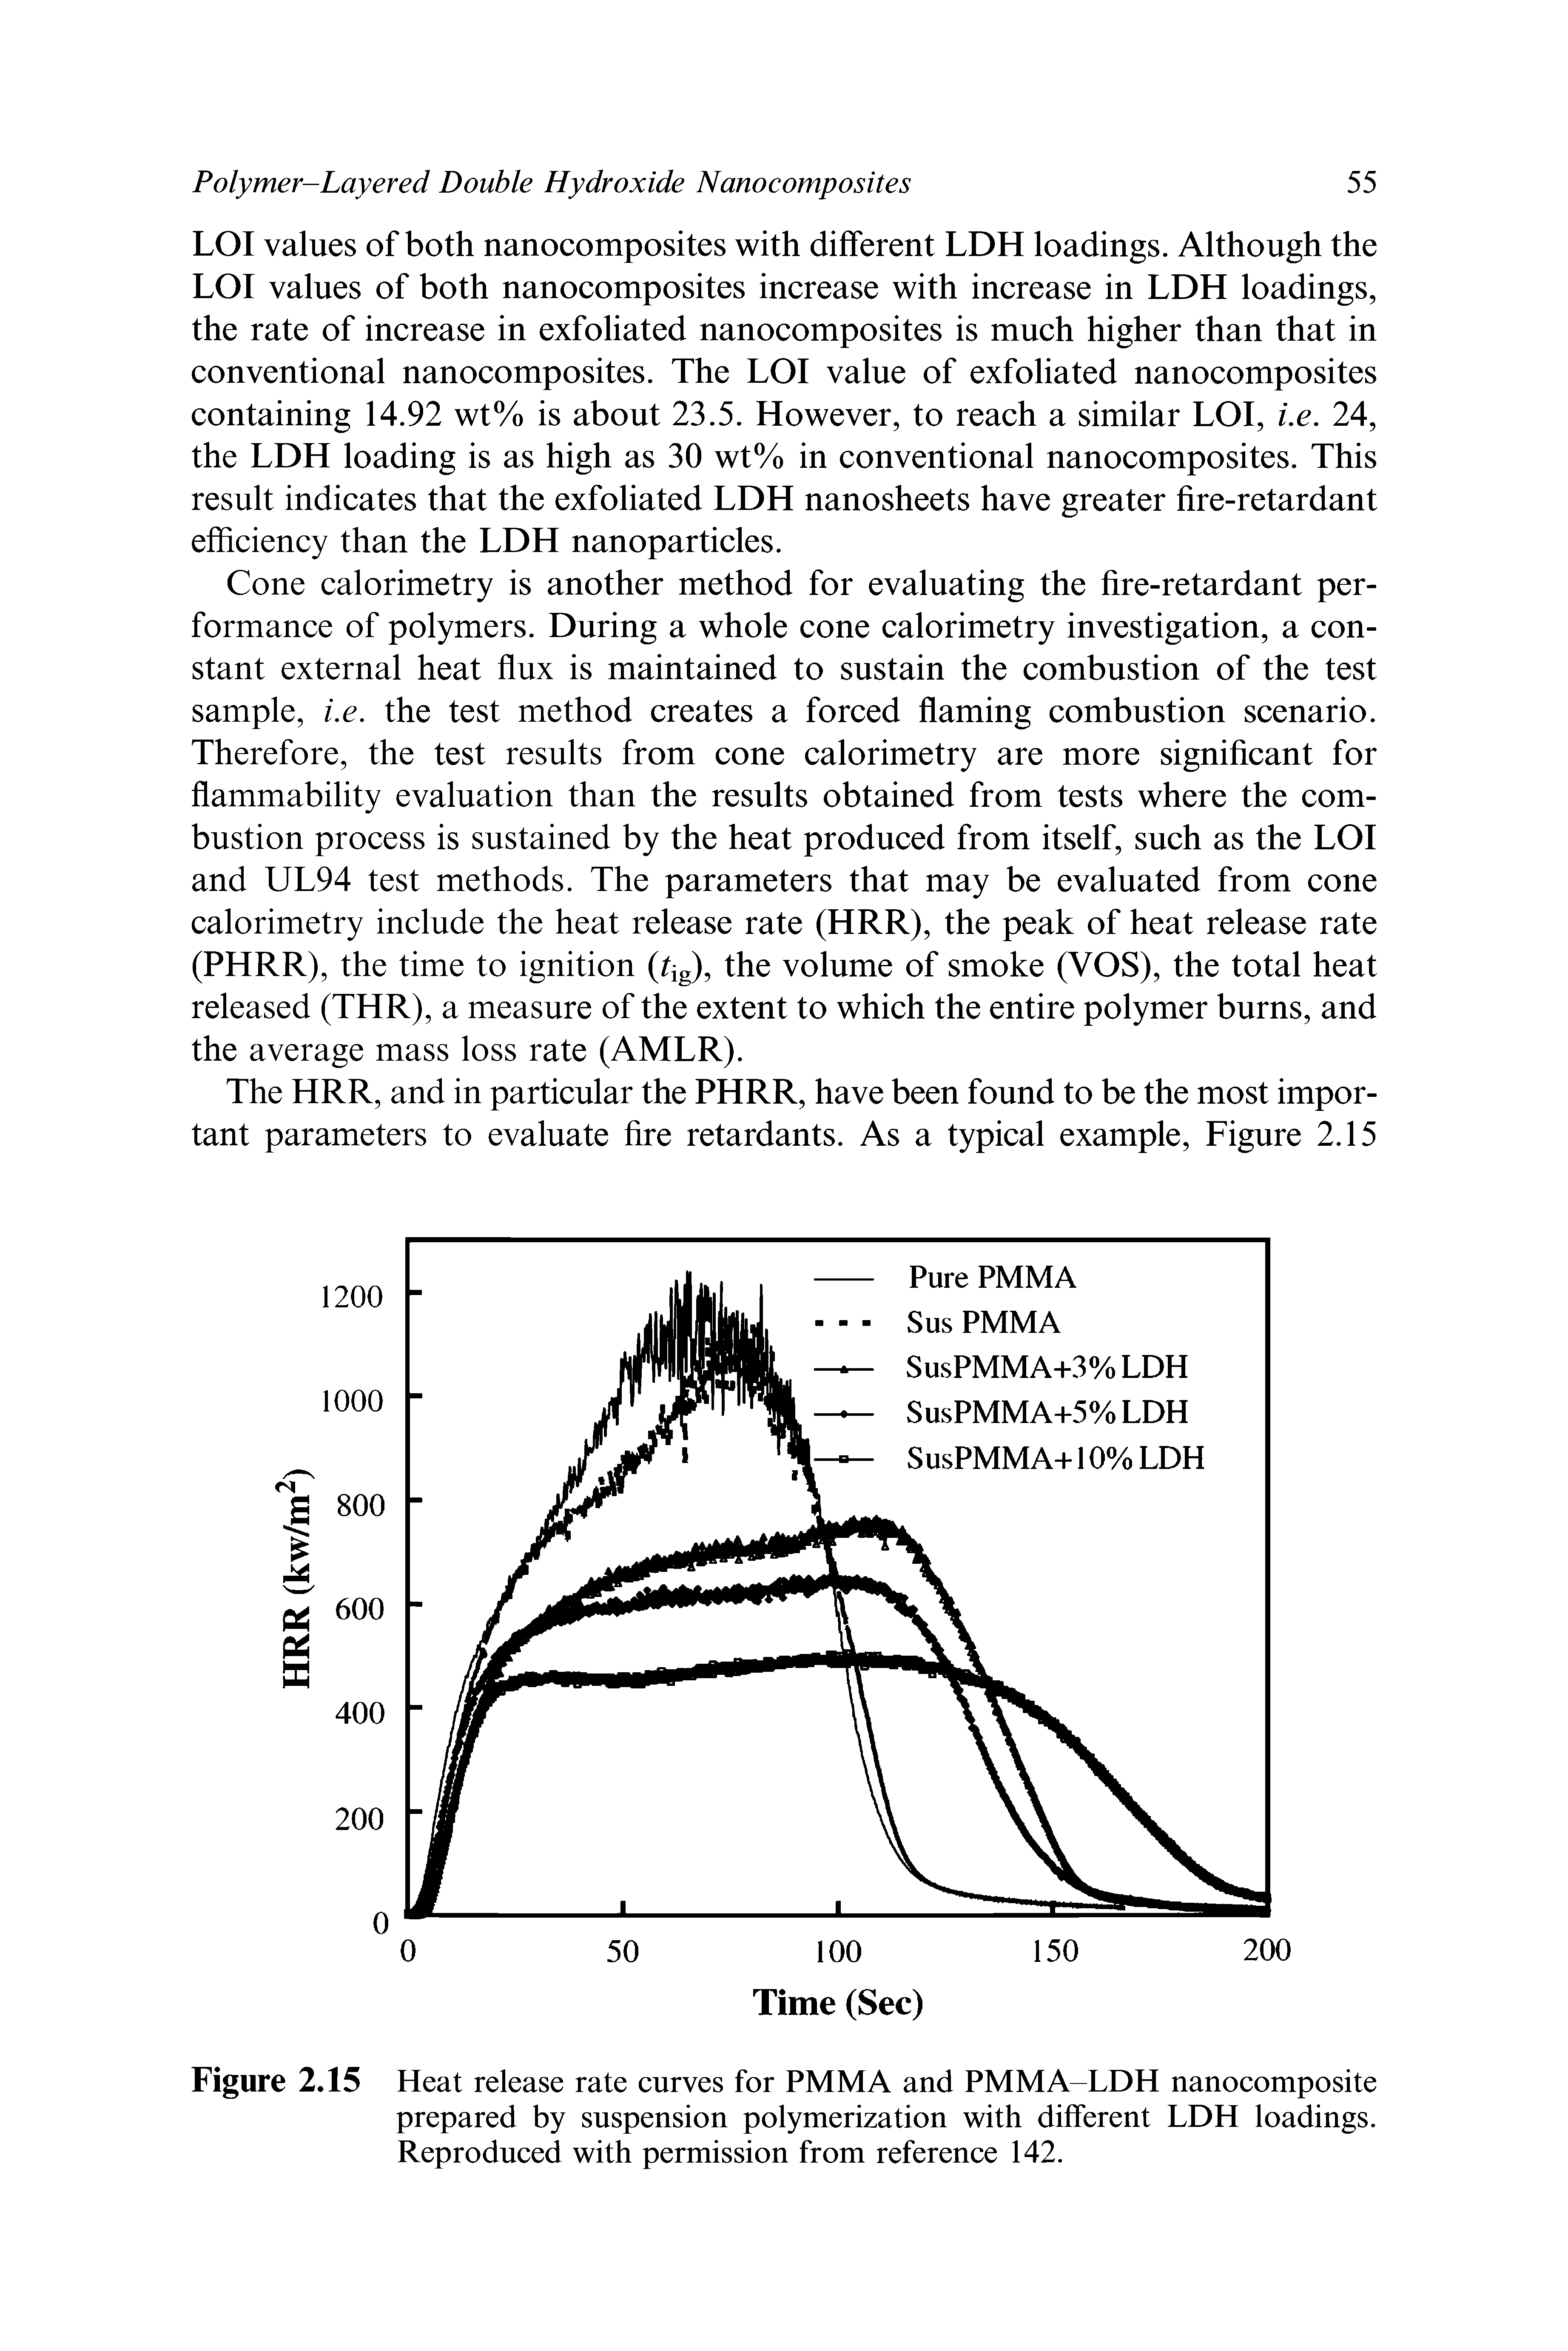 Figure 2.15 Heat release rate curves for PMMA and PMMA-LDH nanocomposite prepared by suspension polymerization with different LDH loadings. Reproduced with permission from reference 142.